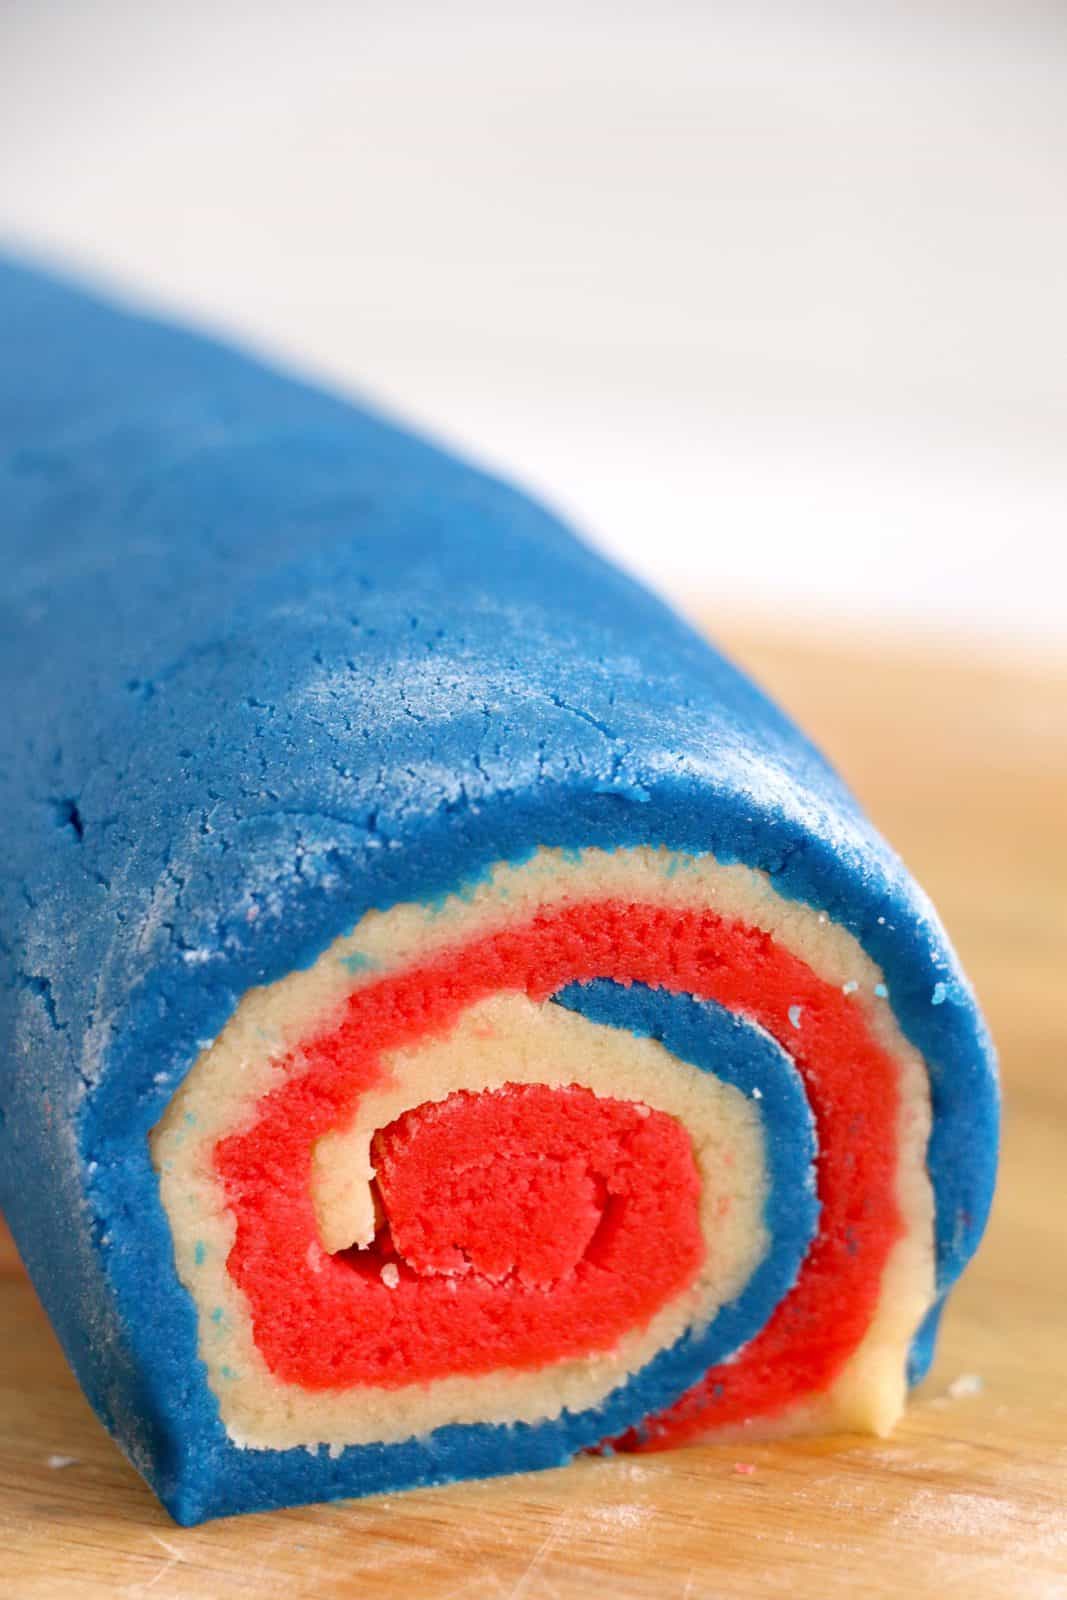 Dough rolled up into a log.